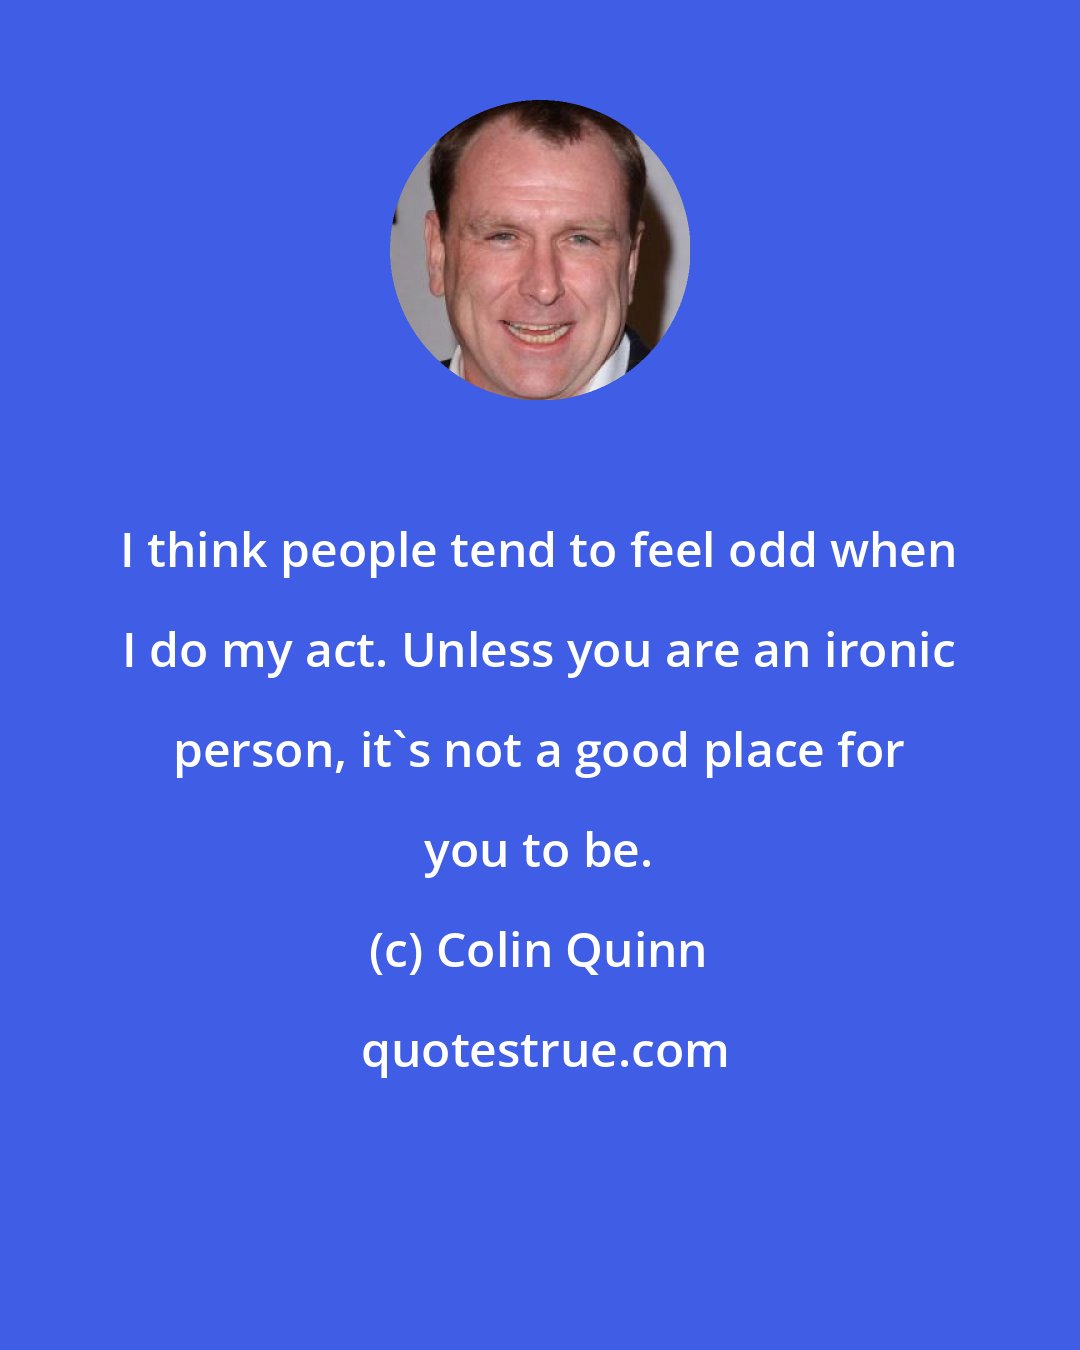 Colin Quinn: I think people tend to feel odd when I do my act. Unless you are an ironic person, it's not a good place for you to be.